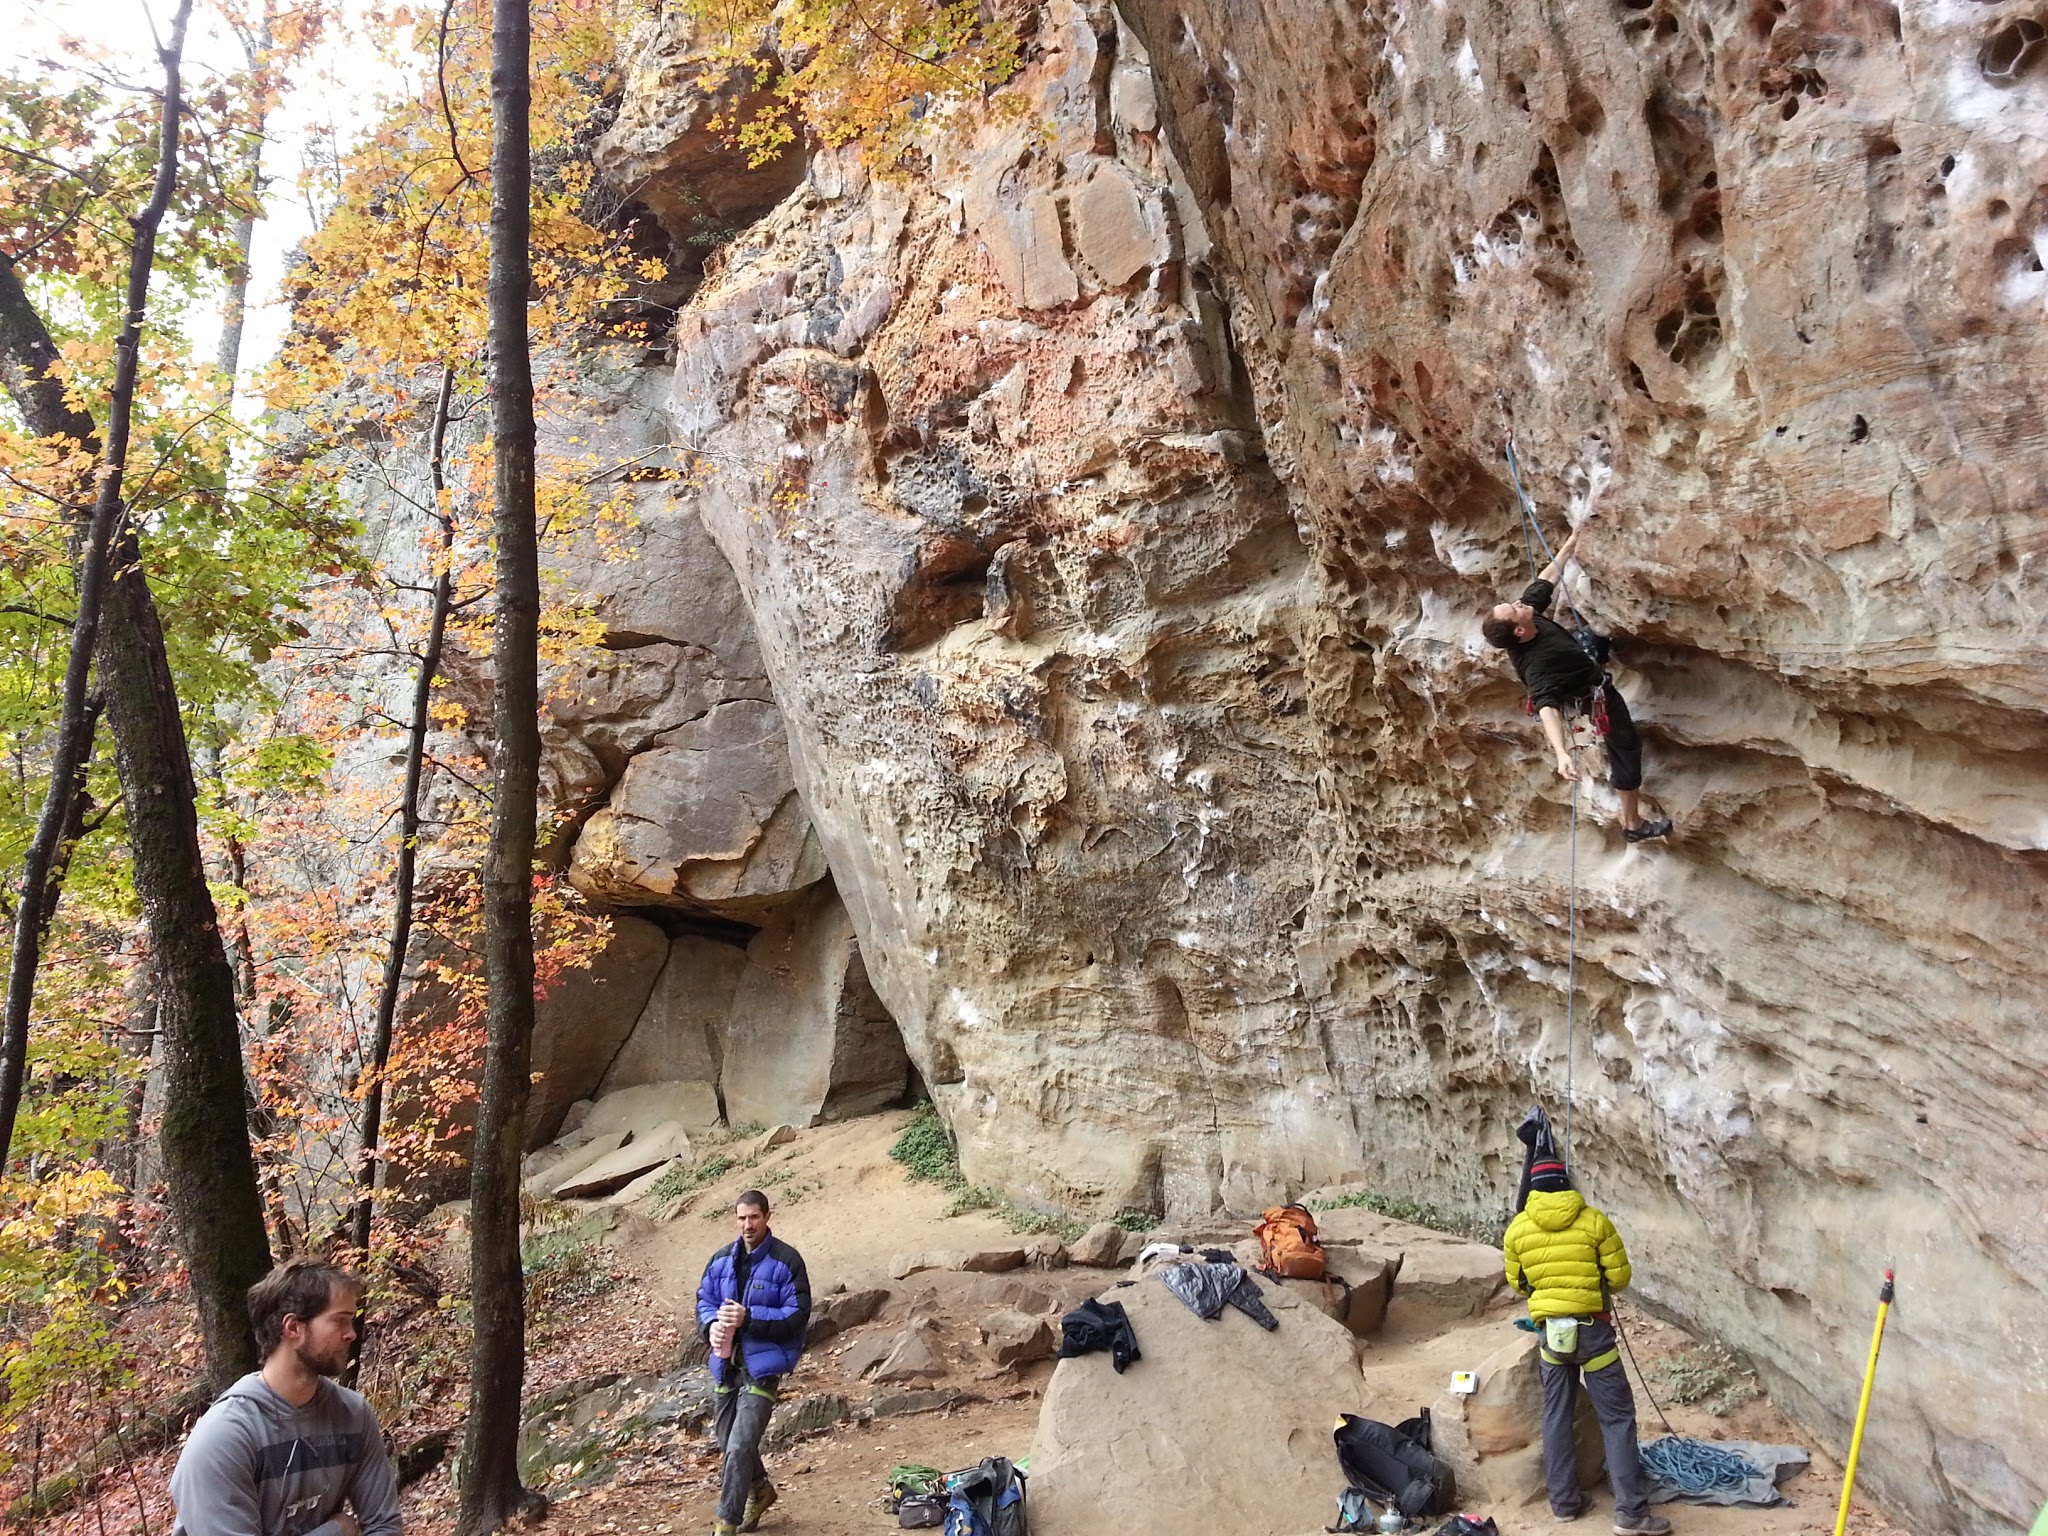 Me climbing at the Red River Gorge (maybe Gung Ho)